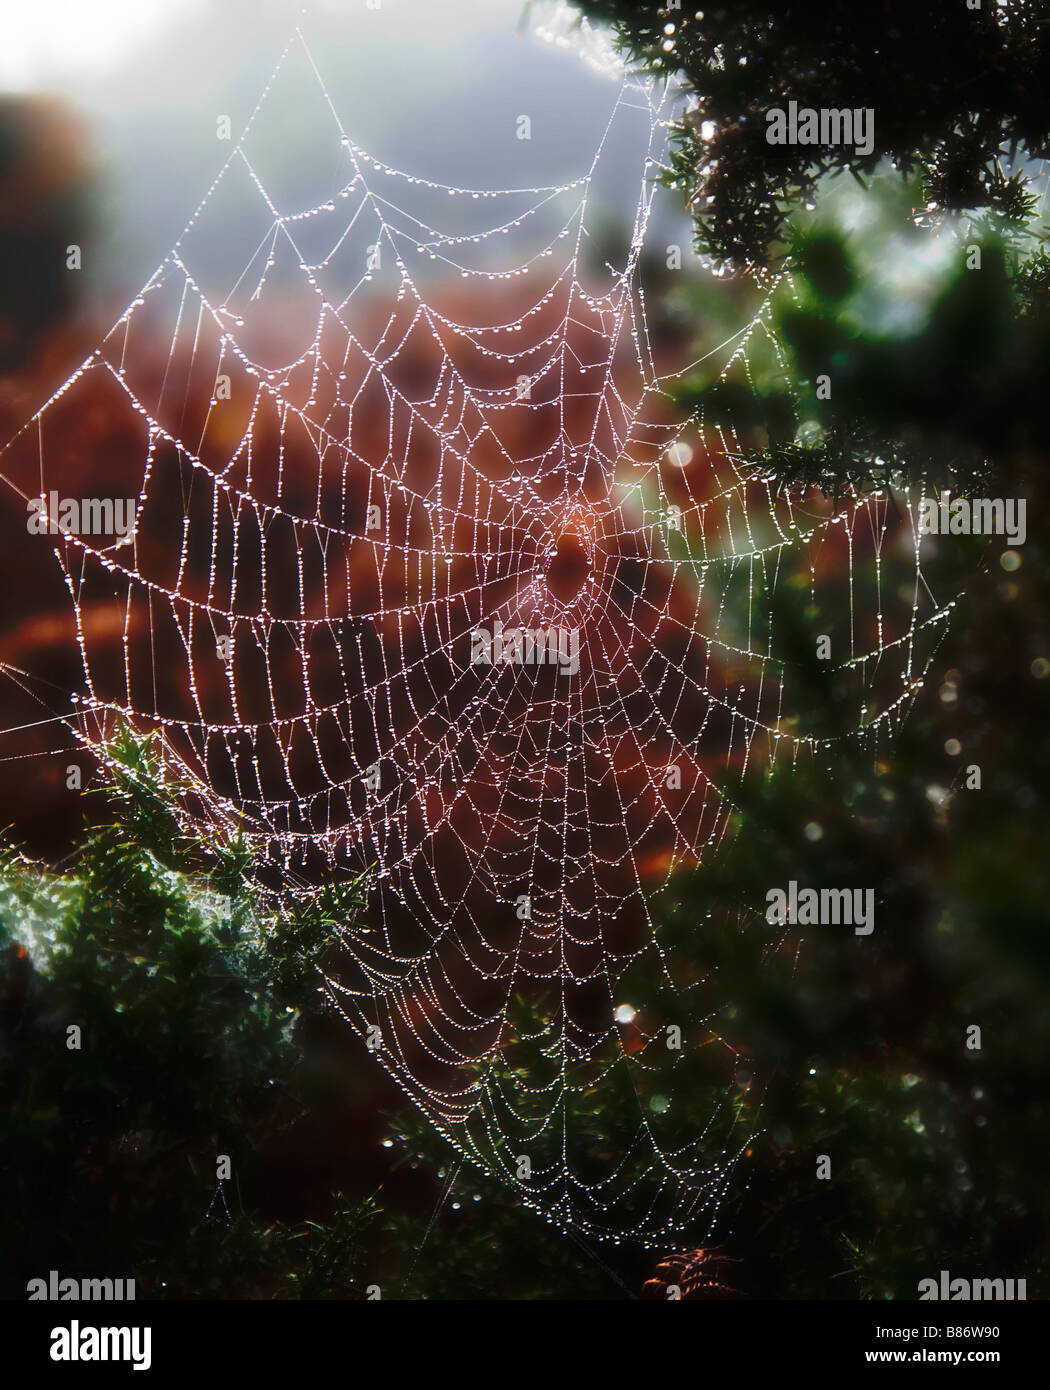 A spiders web covered in early morning dew.  Misty autumn / winter morning in the New Forest, Hampshire. UK. Stock Photo